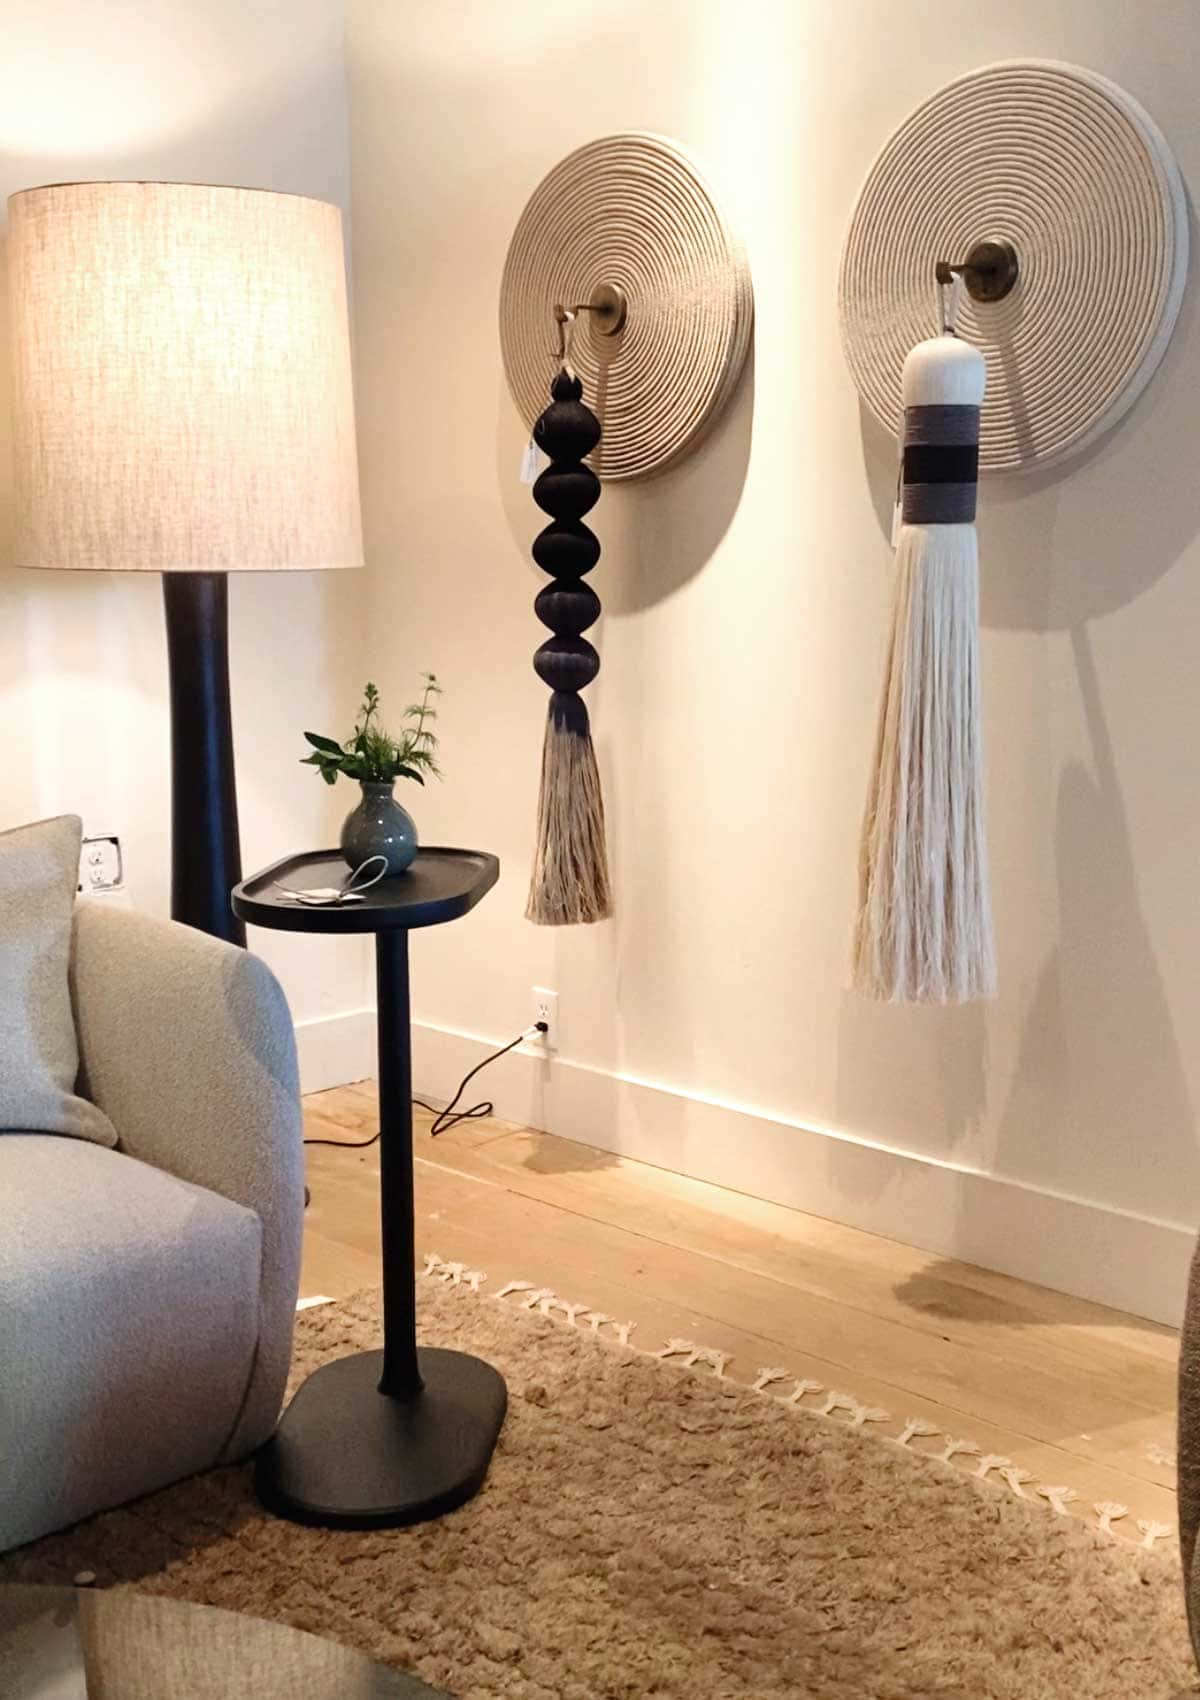 Latest Interior Design Trends found at High Point Furniture Market: Tassels will be trending in home decor